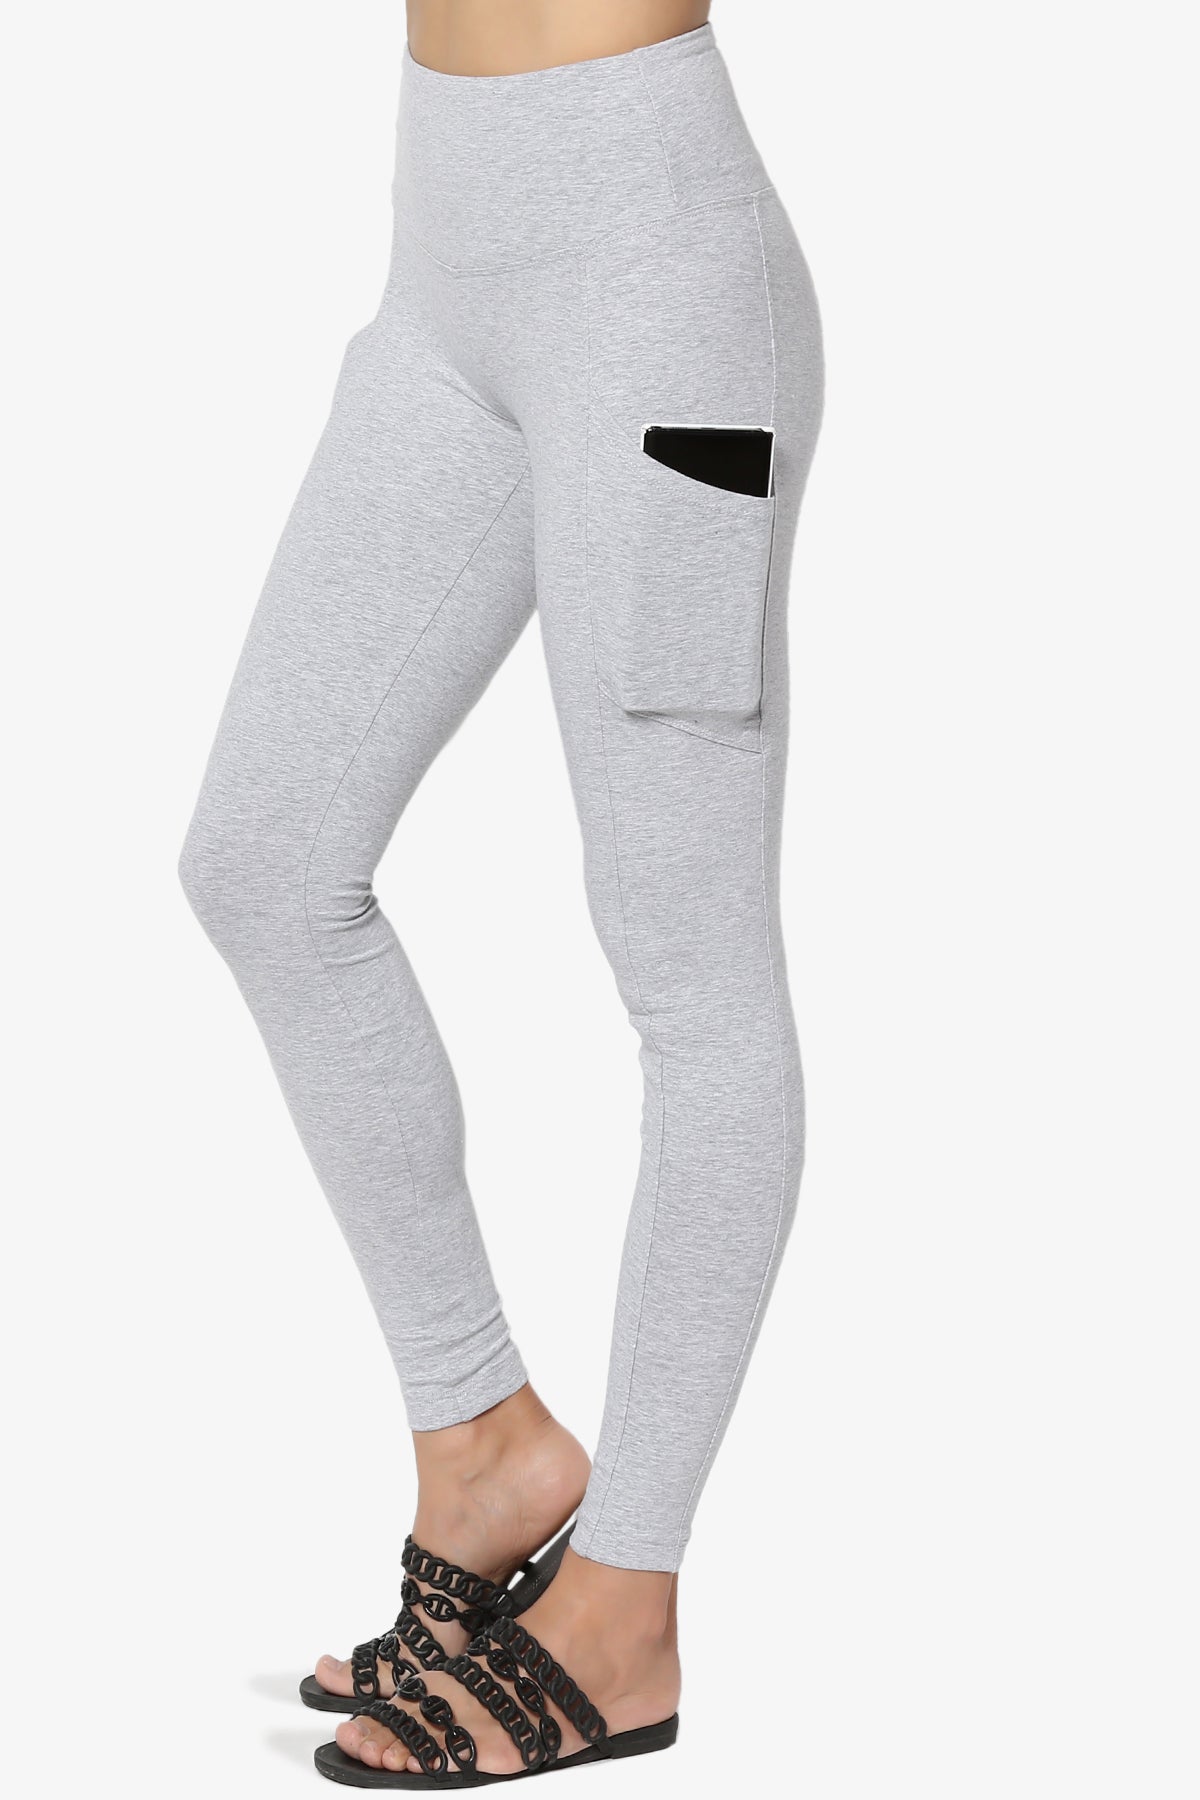 Ansley Luxe Cotton Leggings with Pockets PLUS